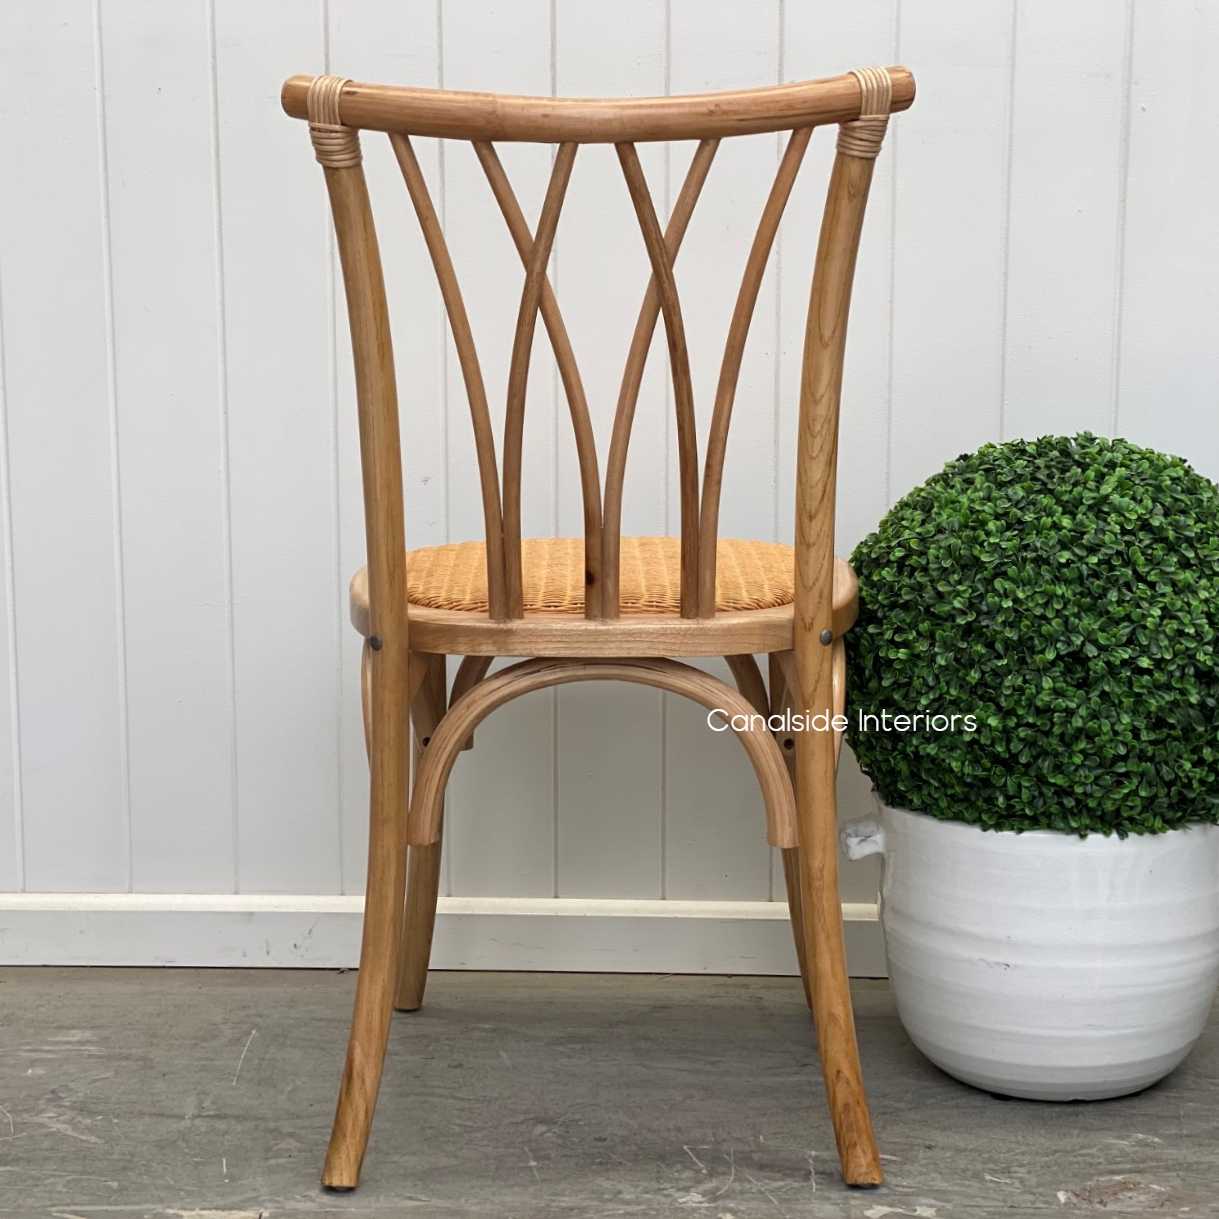 Botanica Chair Natural Dining, CHAIRS, CAFE FURNITURE, HAMPTONS Style, PLANTATION Style, CHAIRS Dining, CAFE FURNITURE Stools & Chairs, PLANTATION STYLE